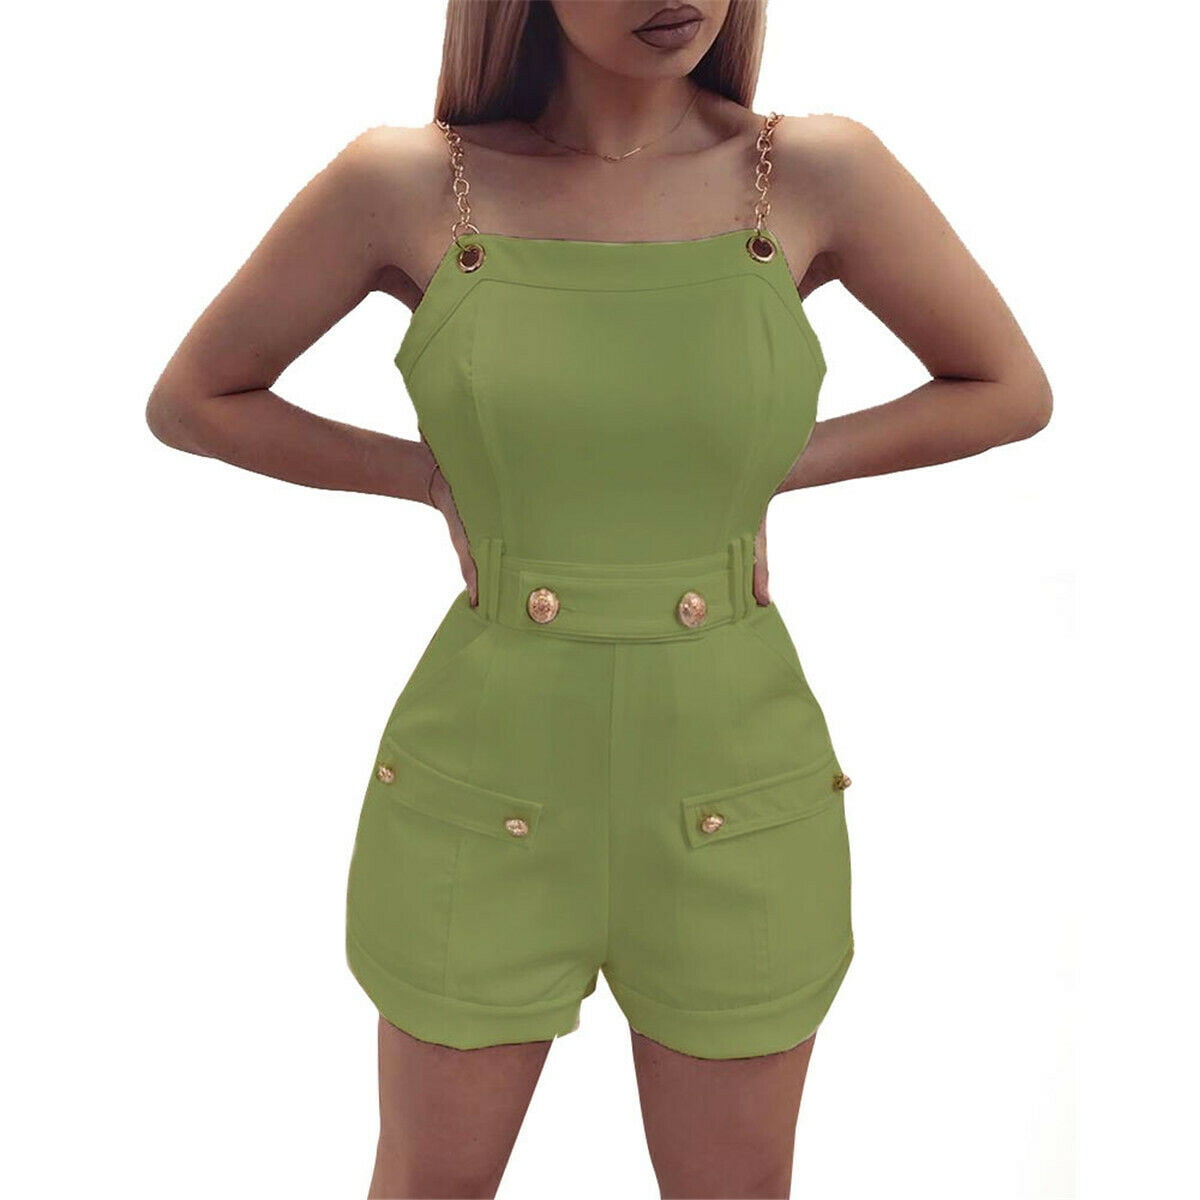 Women Strappy Backless Mini Jumpsuit Ladies Shorts Summer Holiday Beach Playsuit